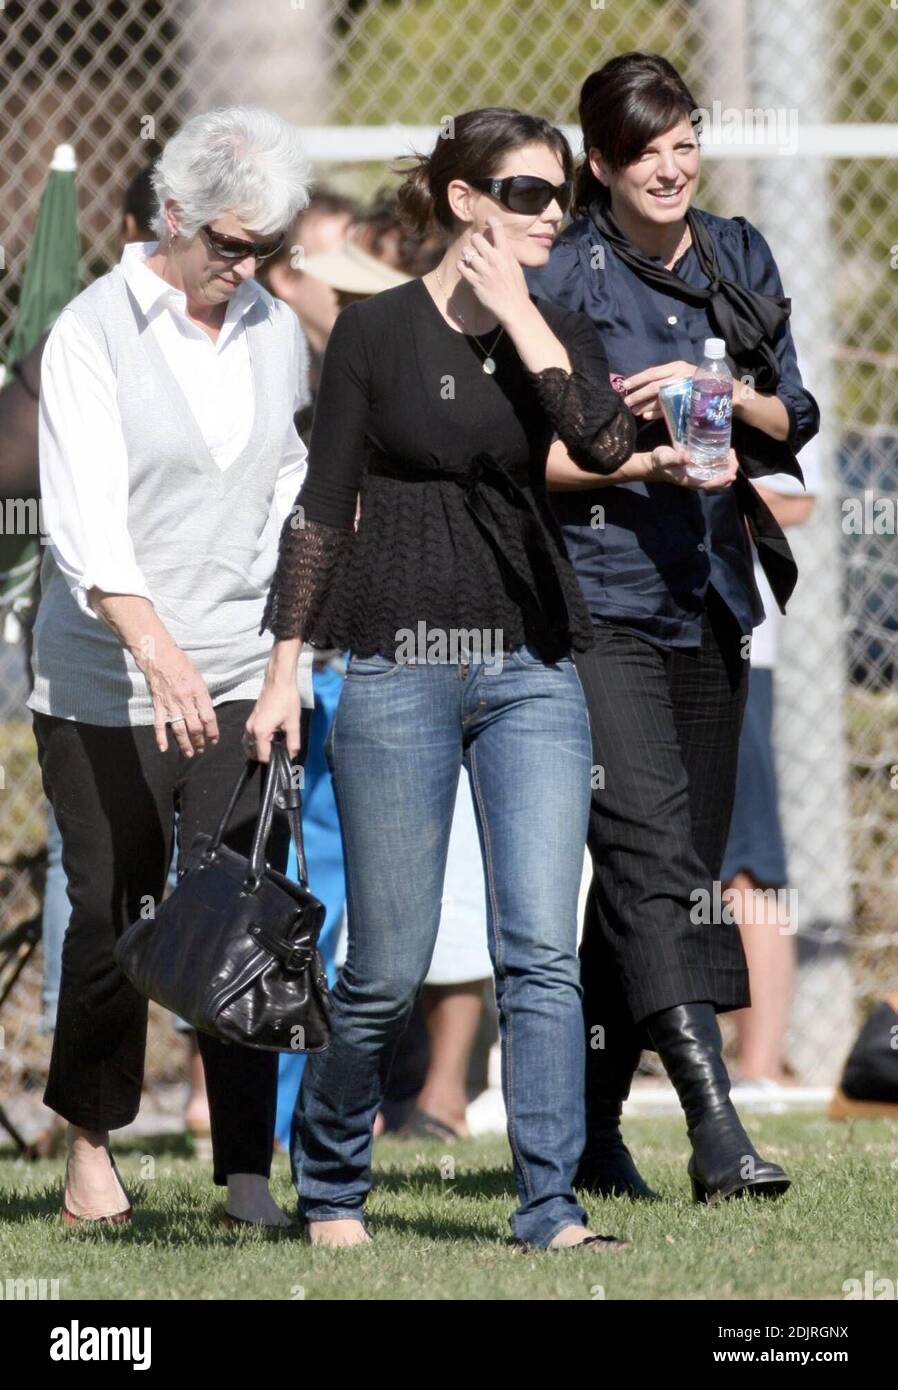 Katie Holmes makes another trip to the ball park, this time with her mother Kathy and one of her sisters. The trim looking actress told photographers she was excited about her upcoming wedding to Tom Cruise. 10/28/06 Stock Photo